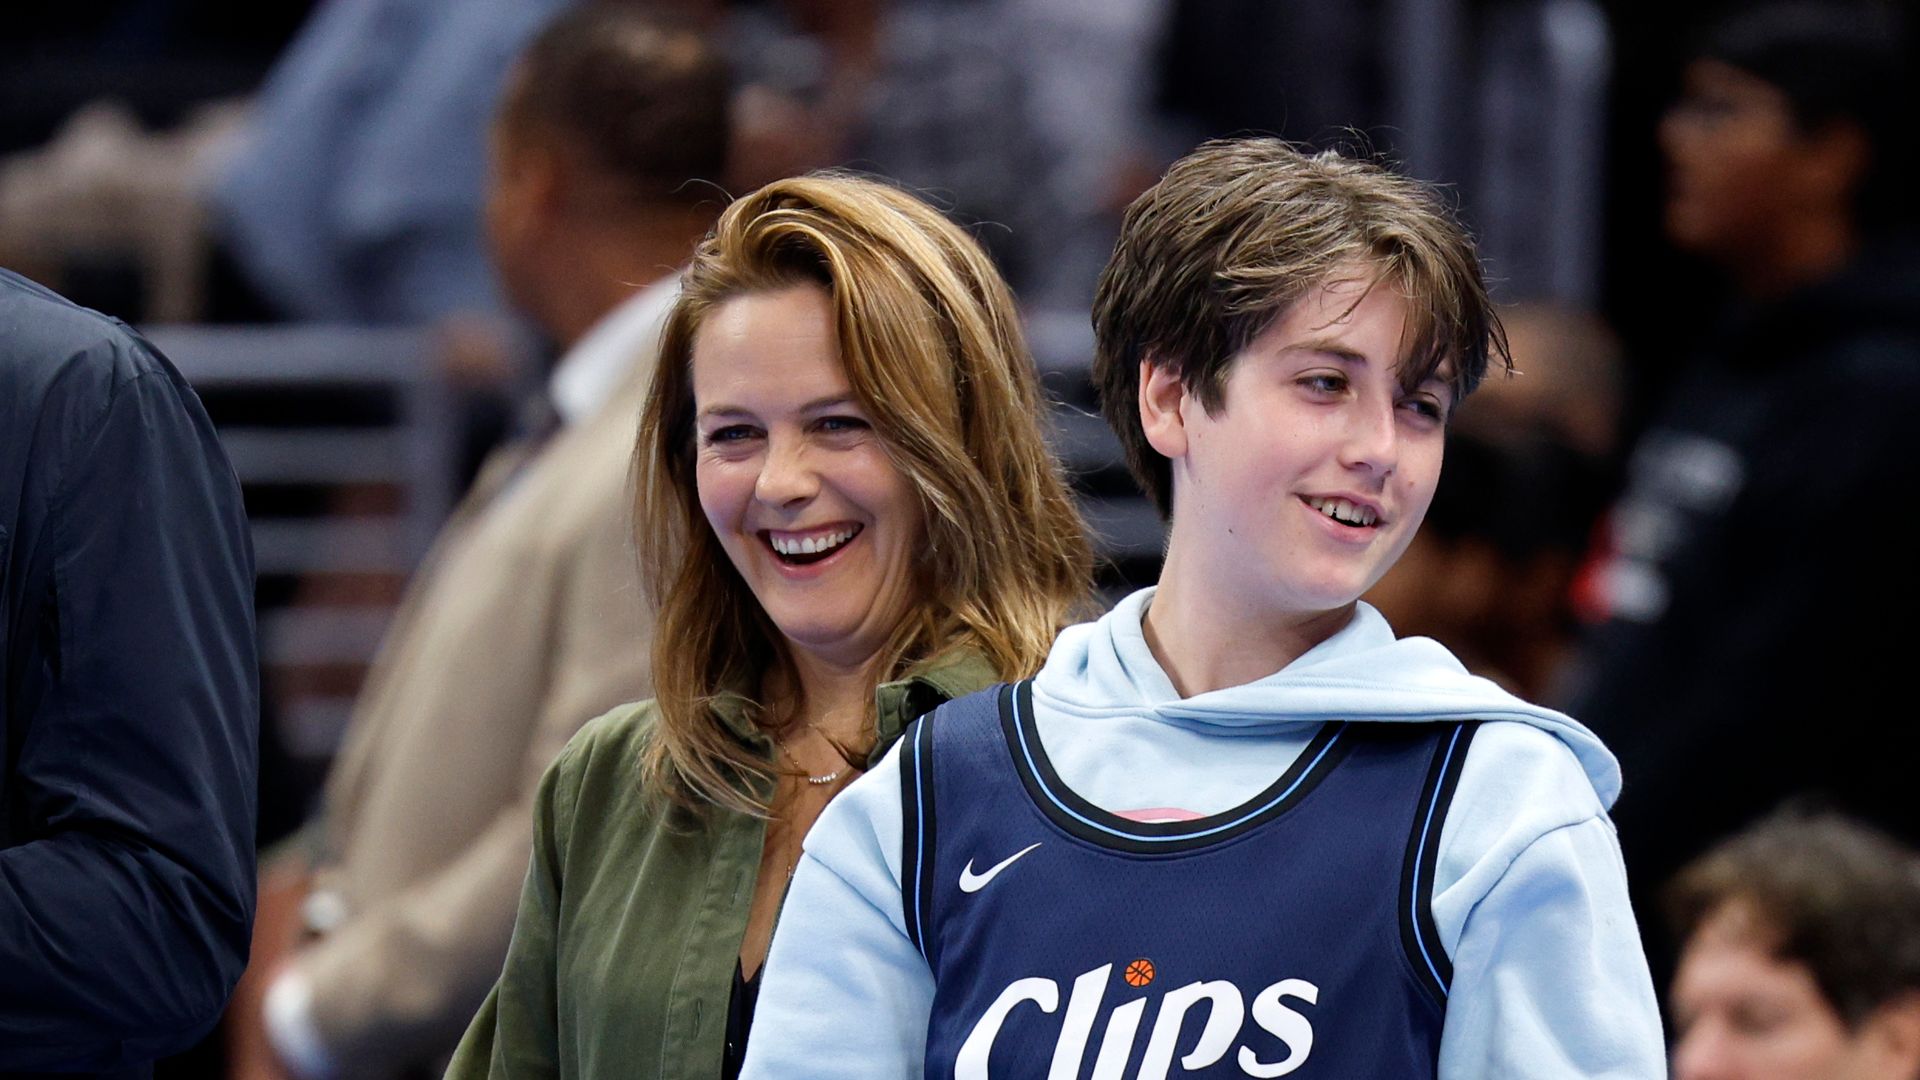 Alicia Silverstone's son Bear, 12, towers over her while spending 'quality time' on holiday